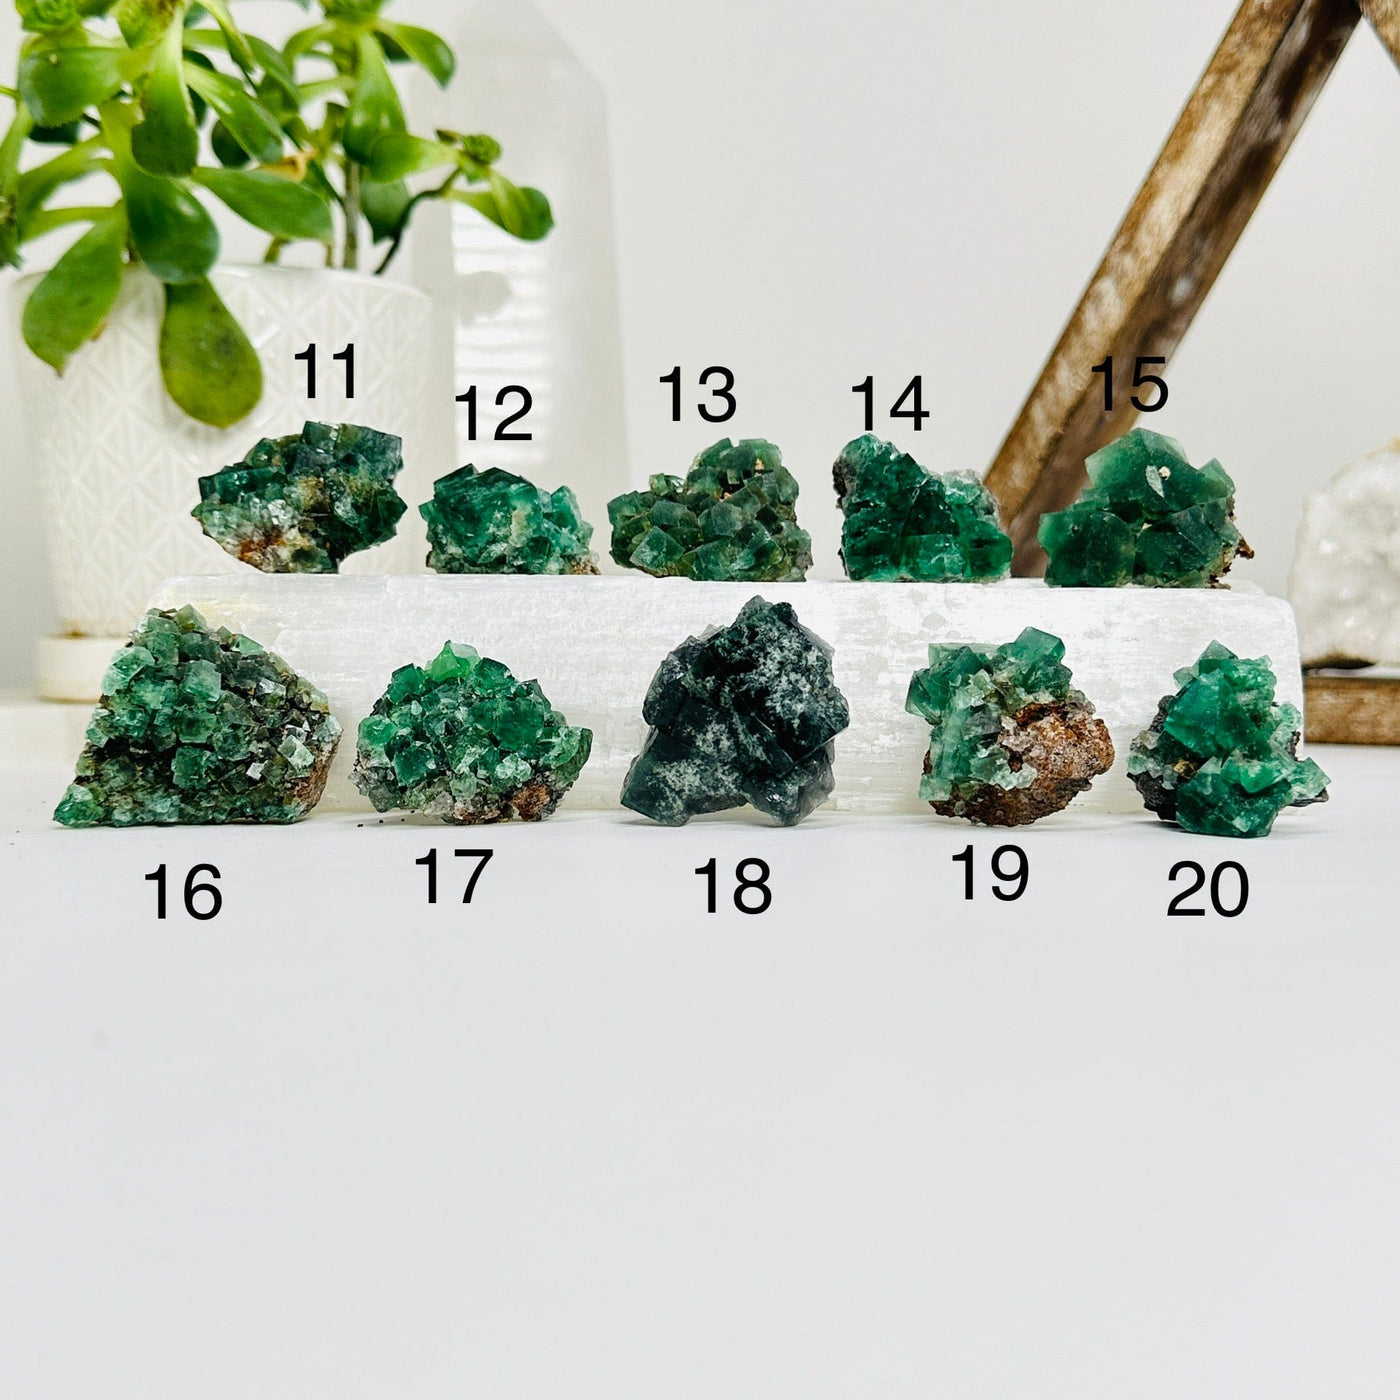 variants 11-20 of diana maria fluorite clusters